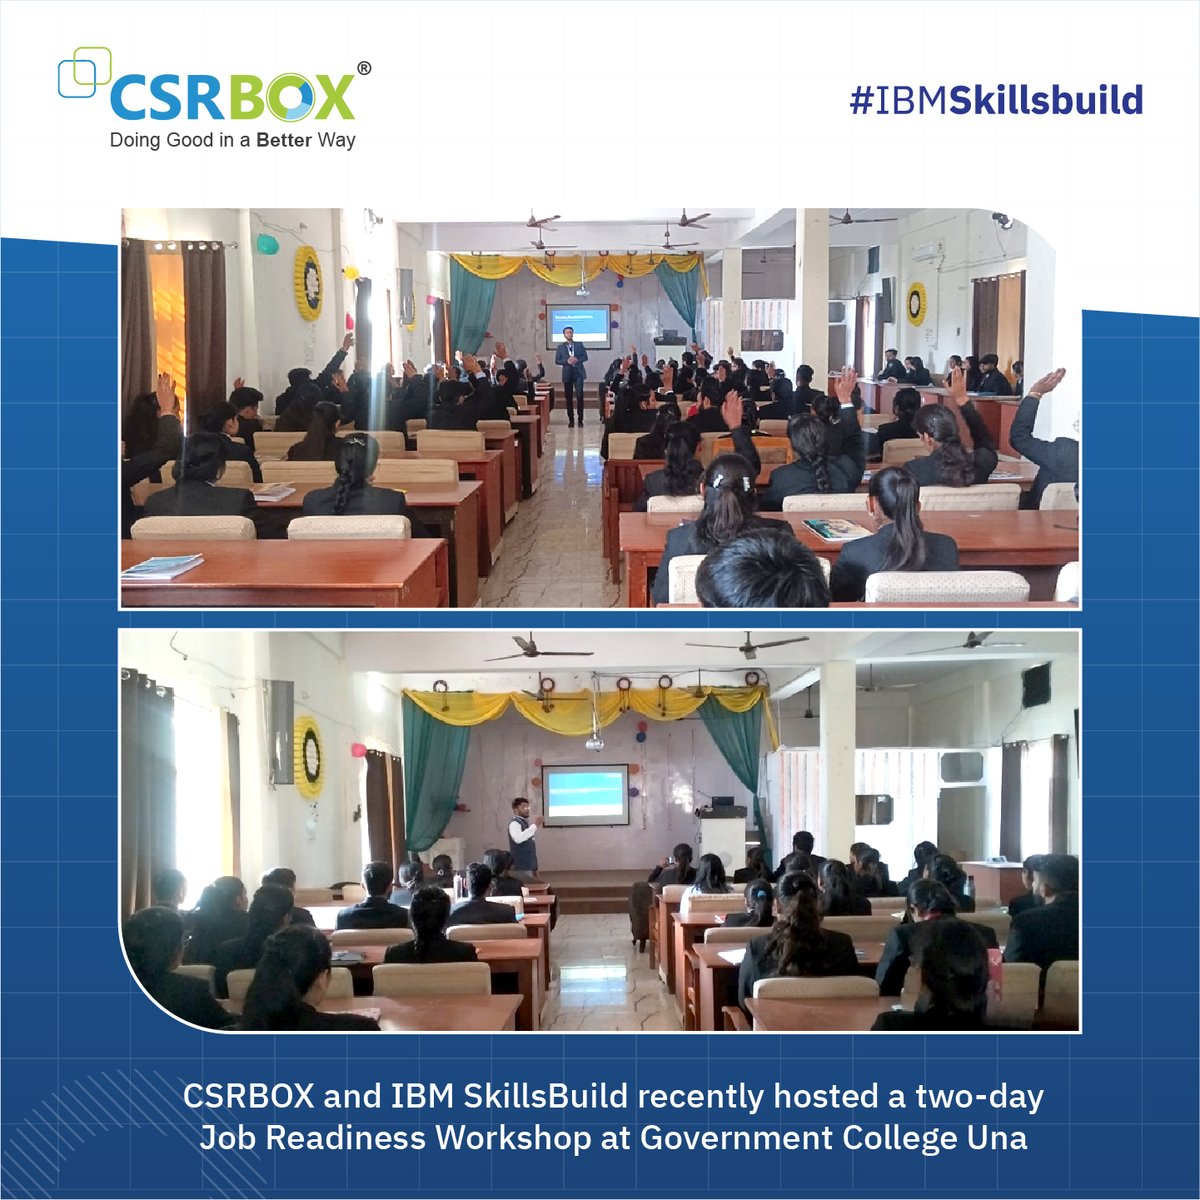 CSRBOX and IBM SkillsBuild recently hosted a transformative two-day job readiness workshop at Government College Una, engaging over 300 students across various fields. #IBMStories #TechInnovation #SkillsBuildSuccess #IBM_SkillsBuild